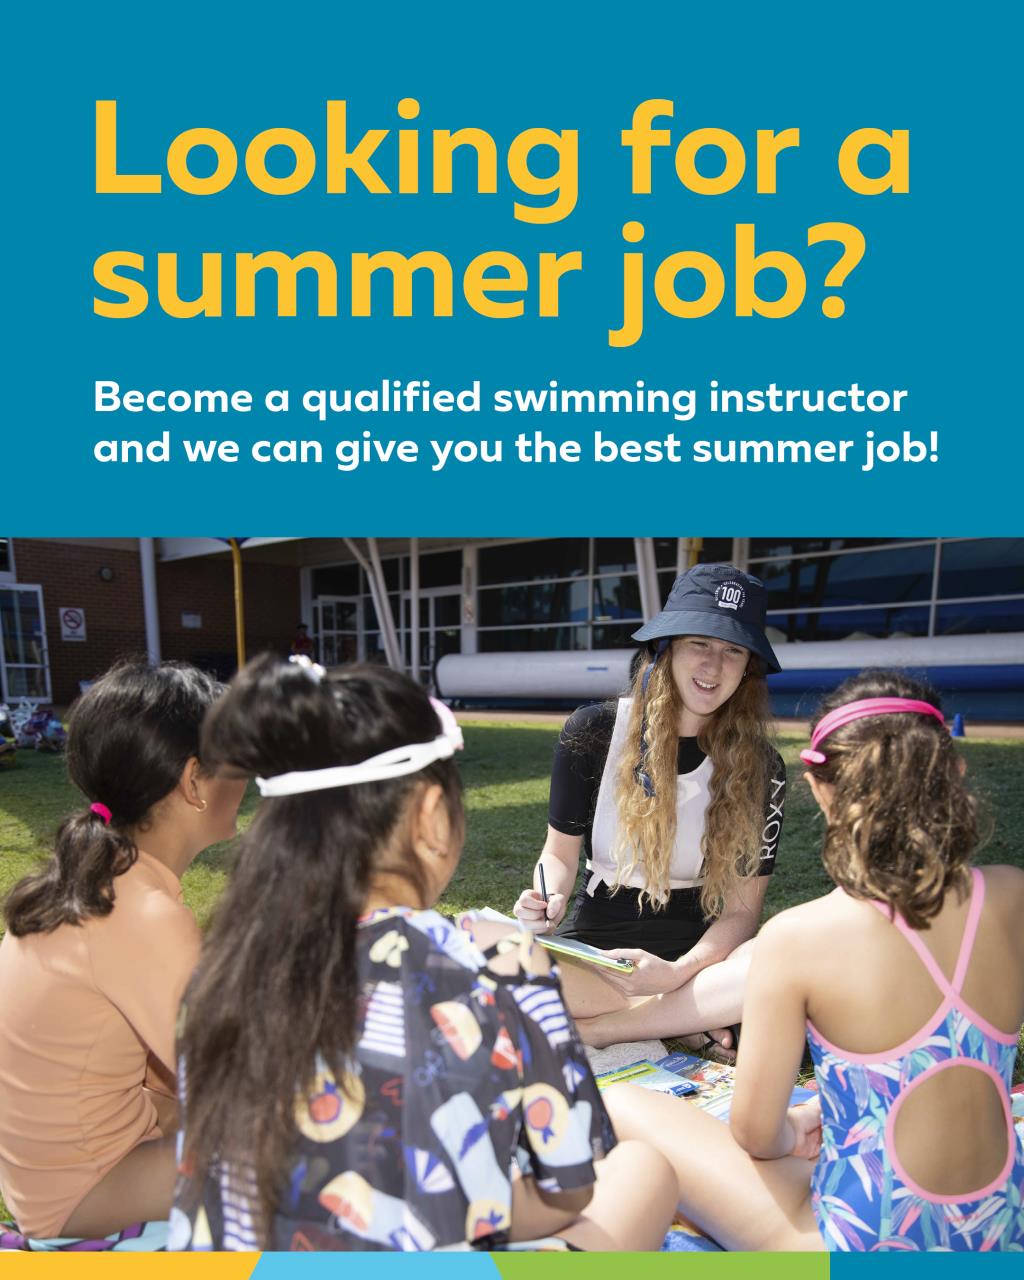 Looking for a Summer Job?